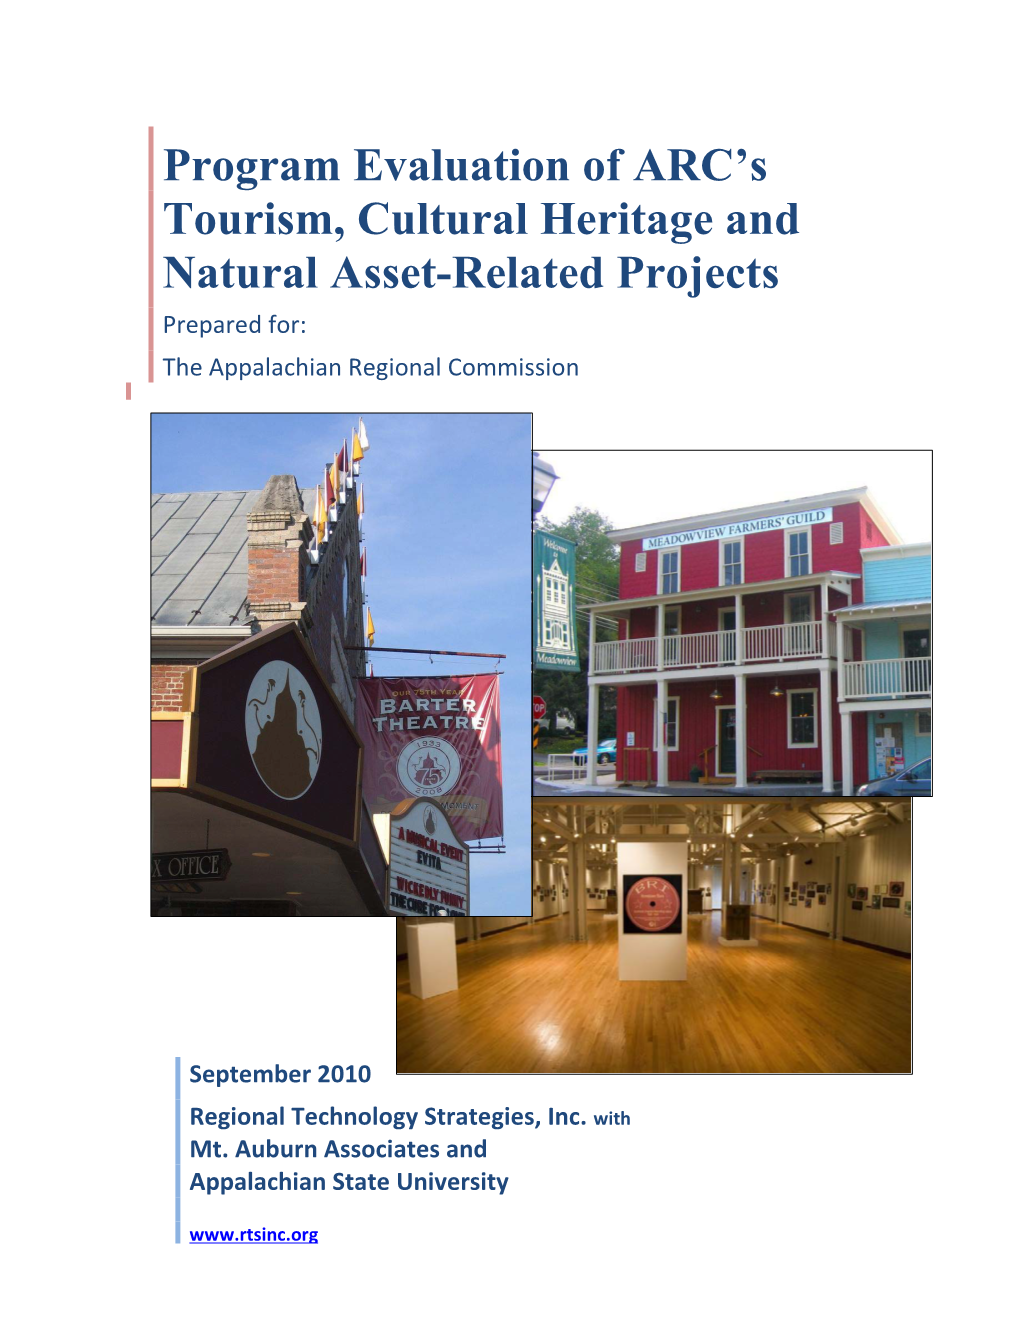 Program Evaluation of ARC's Tourism, Cultural Heritage And